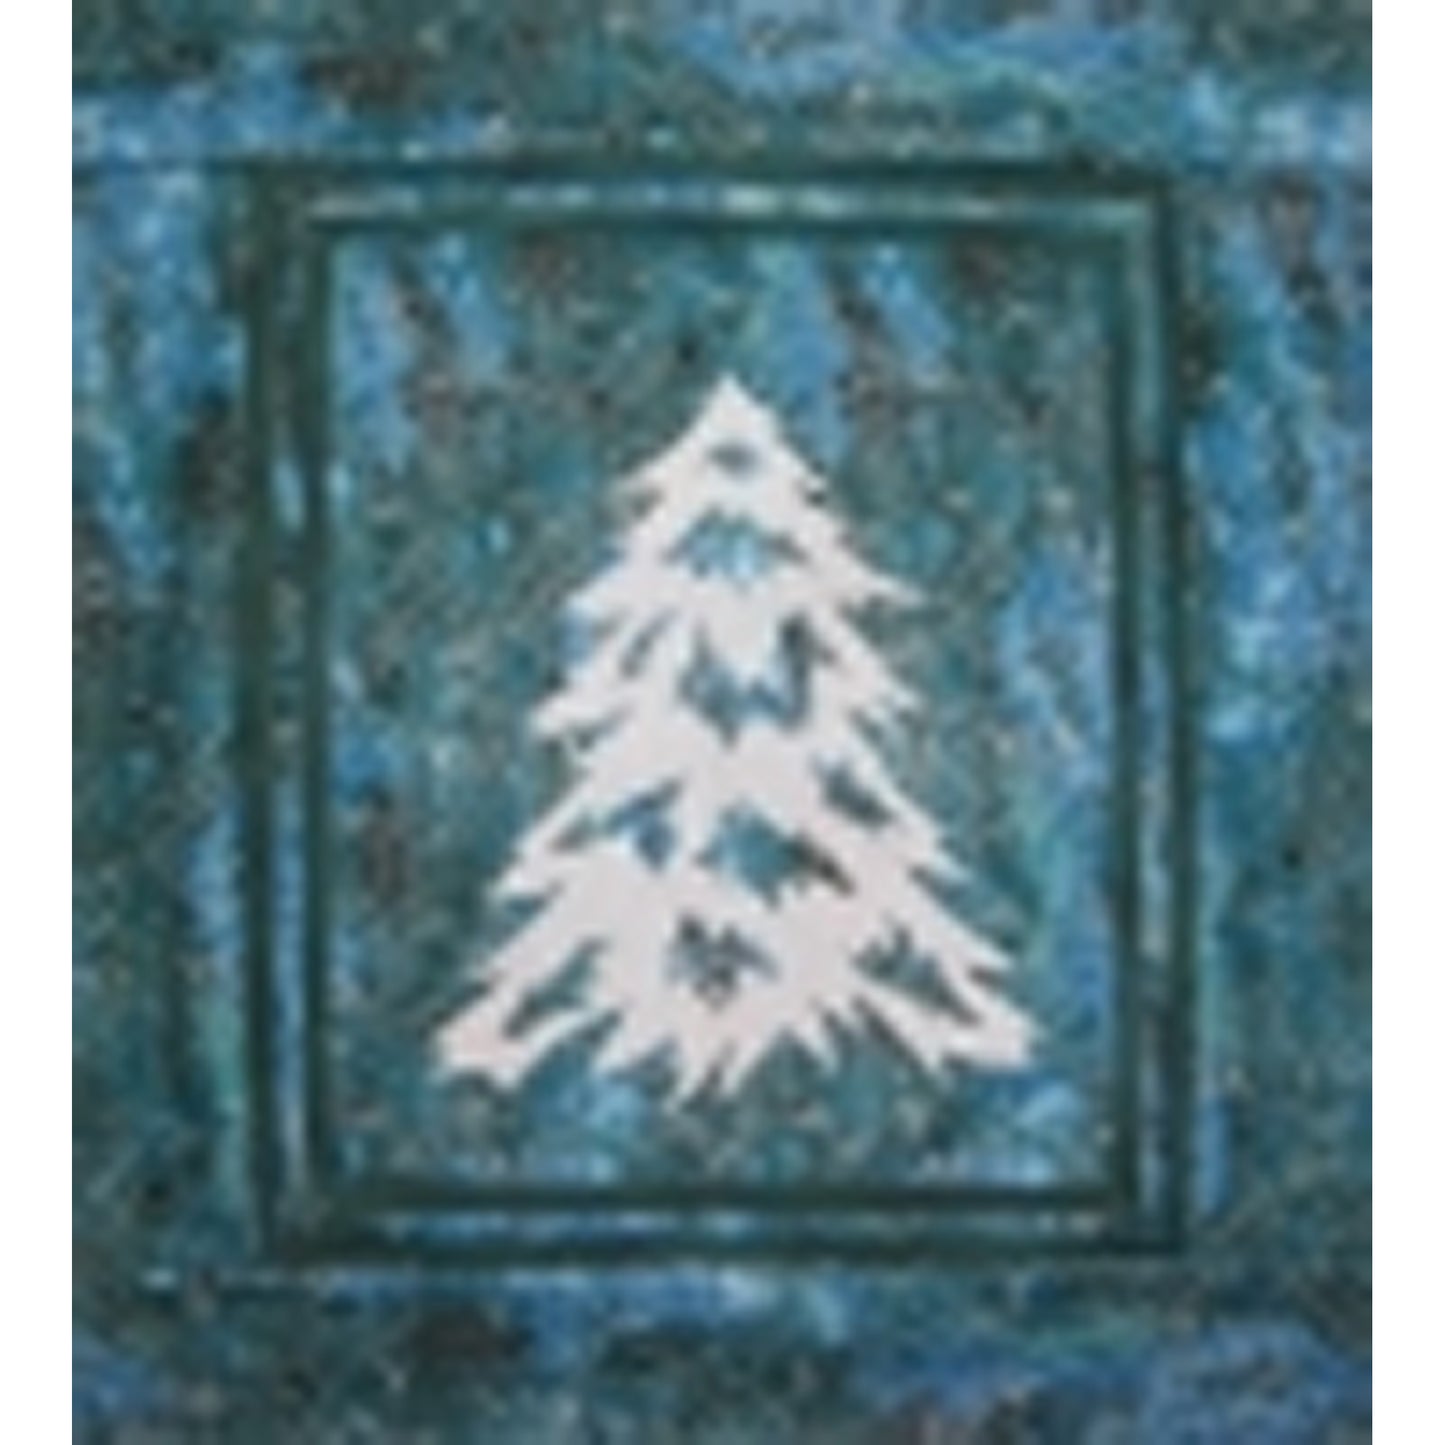 Quilt of a white evergreen tree/outline with snowflakes on a blue-green background.